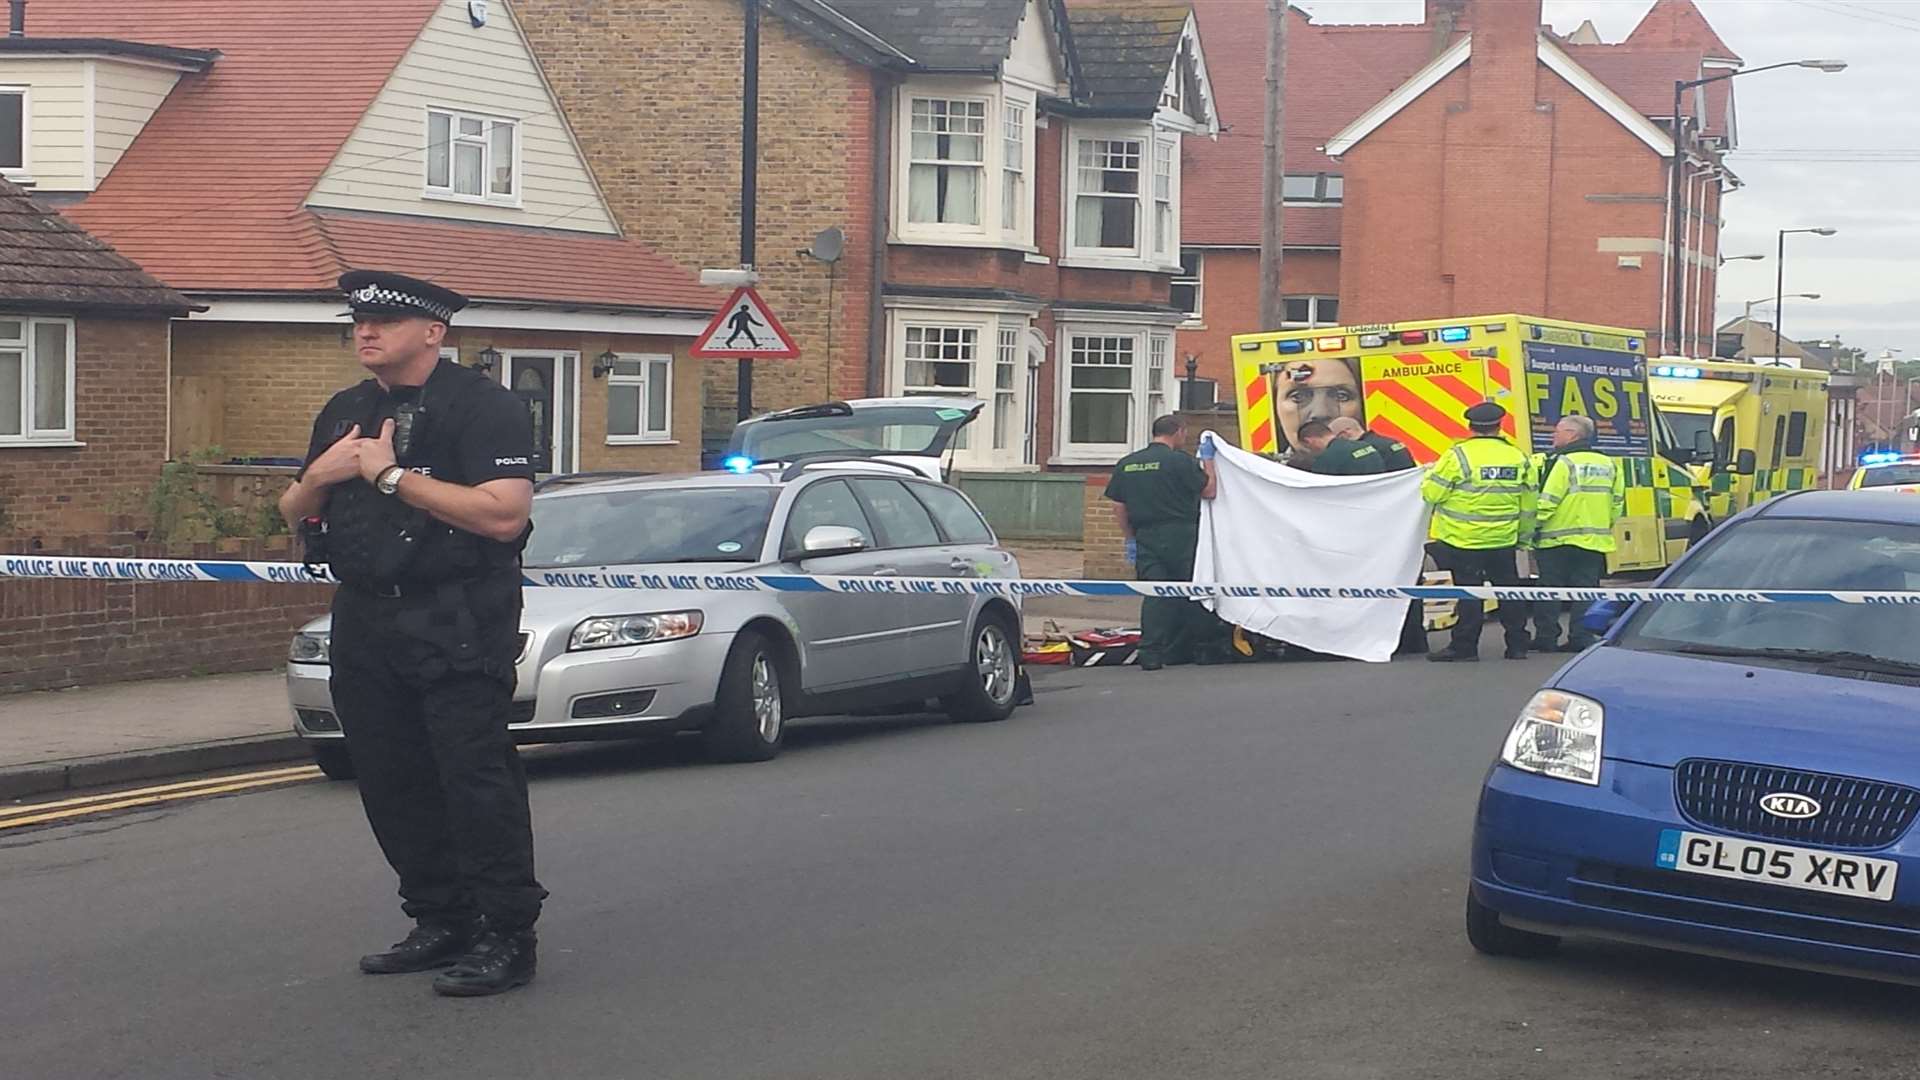 Police shut the road so the man could be treated